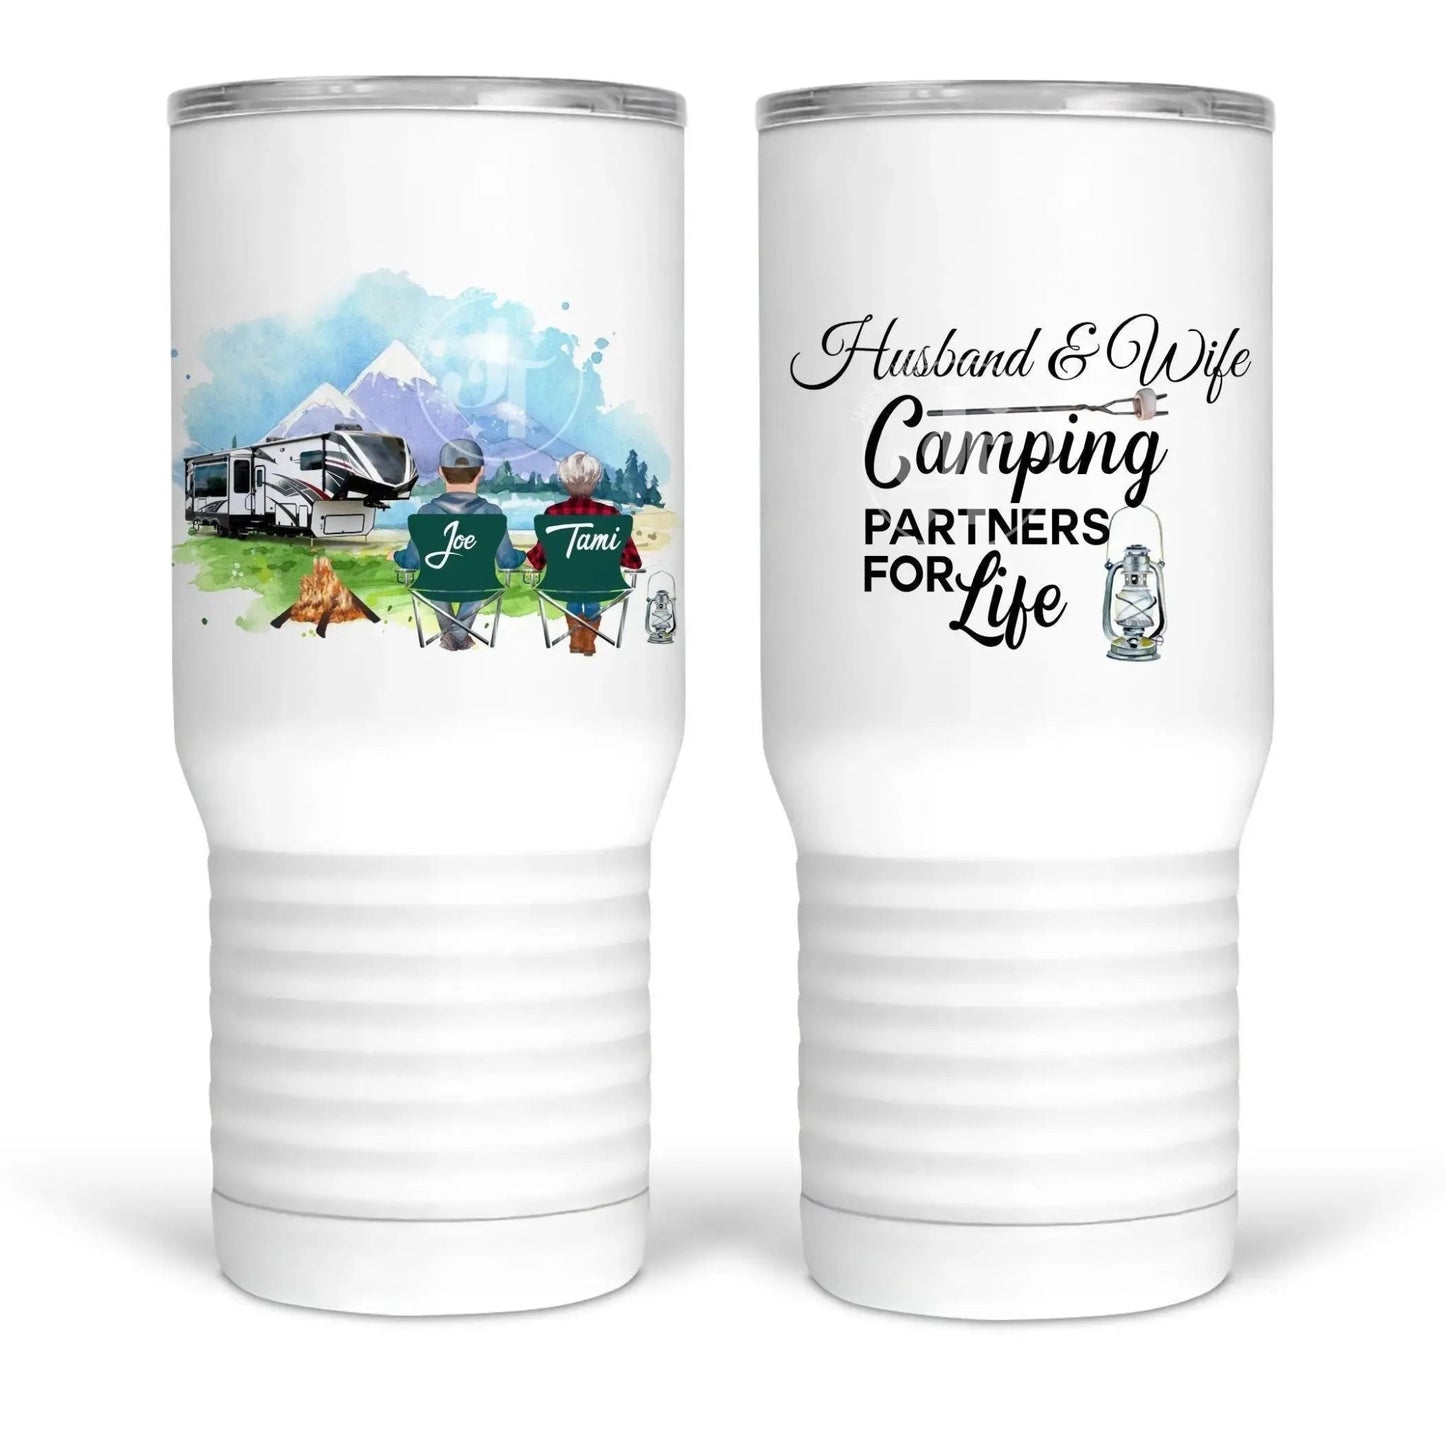 Husband and Wife Camping Partners - Jammin Threads